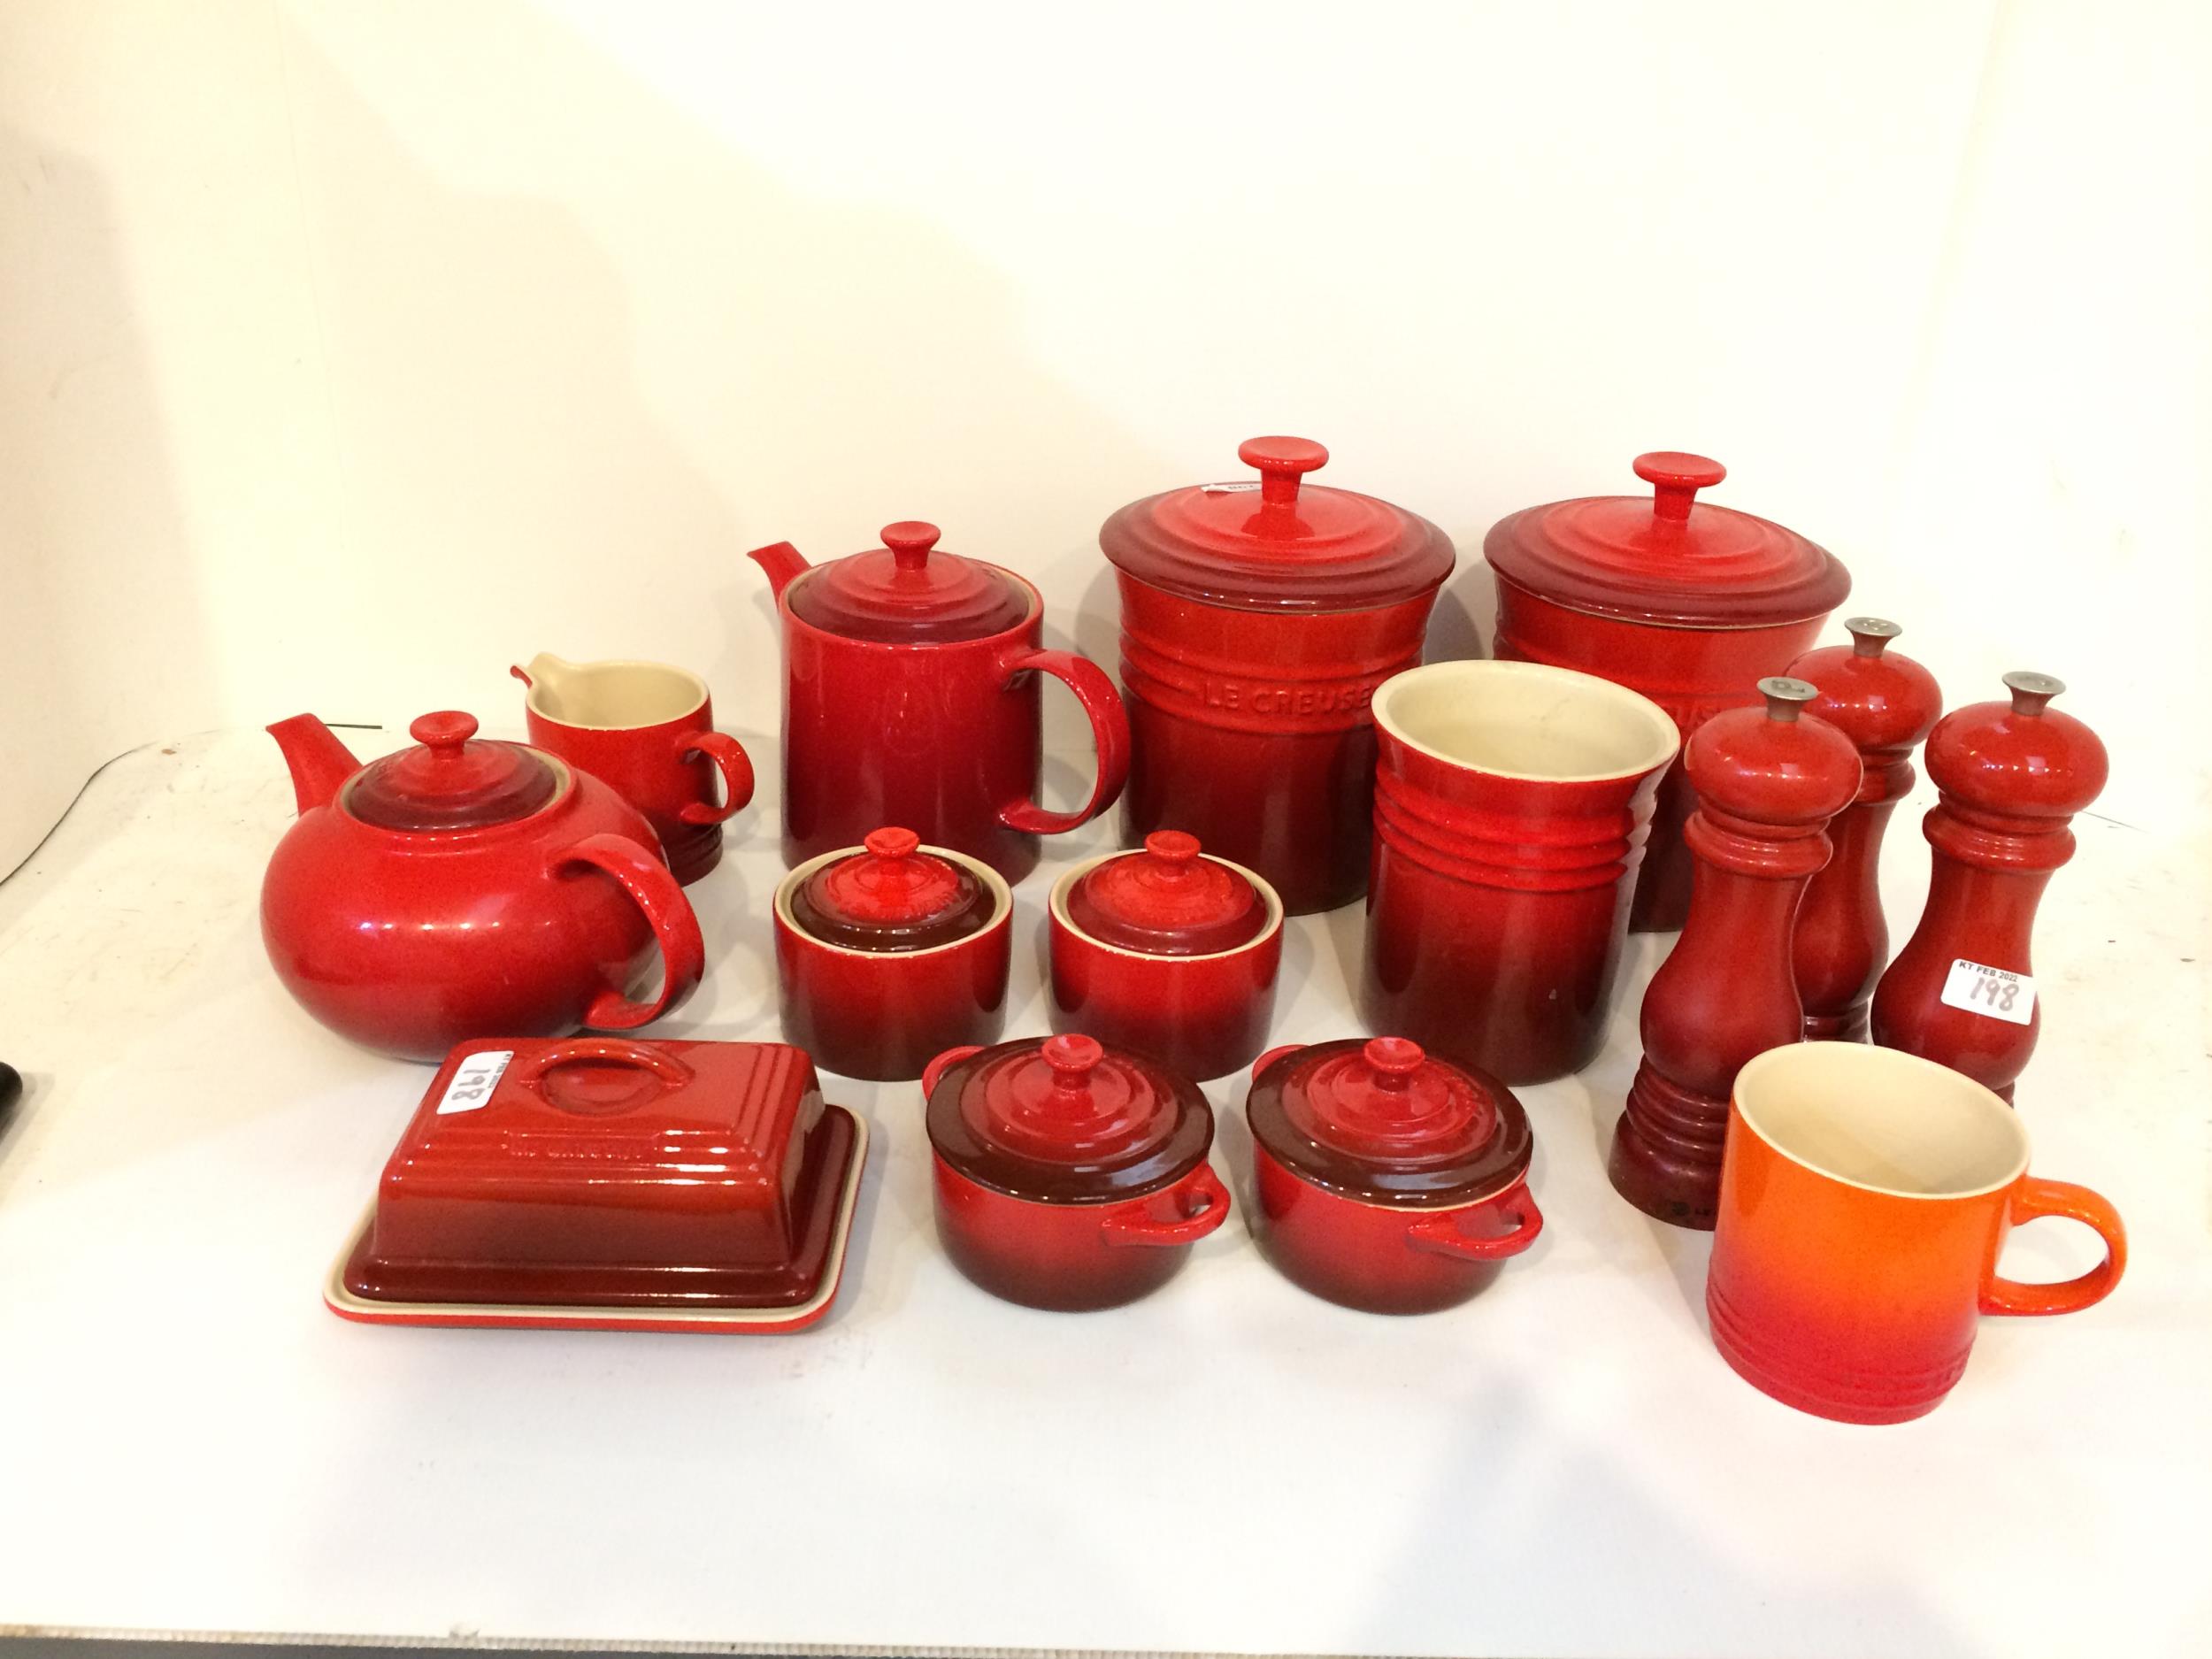 Quantity of Red Le Creuset